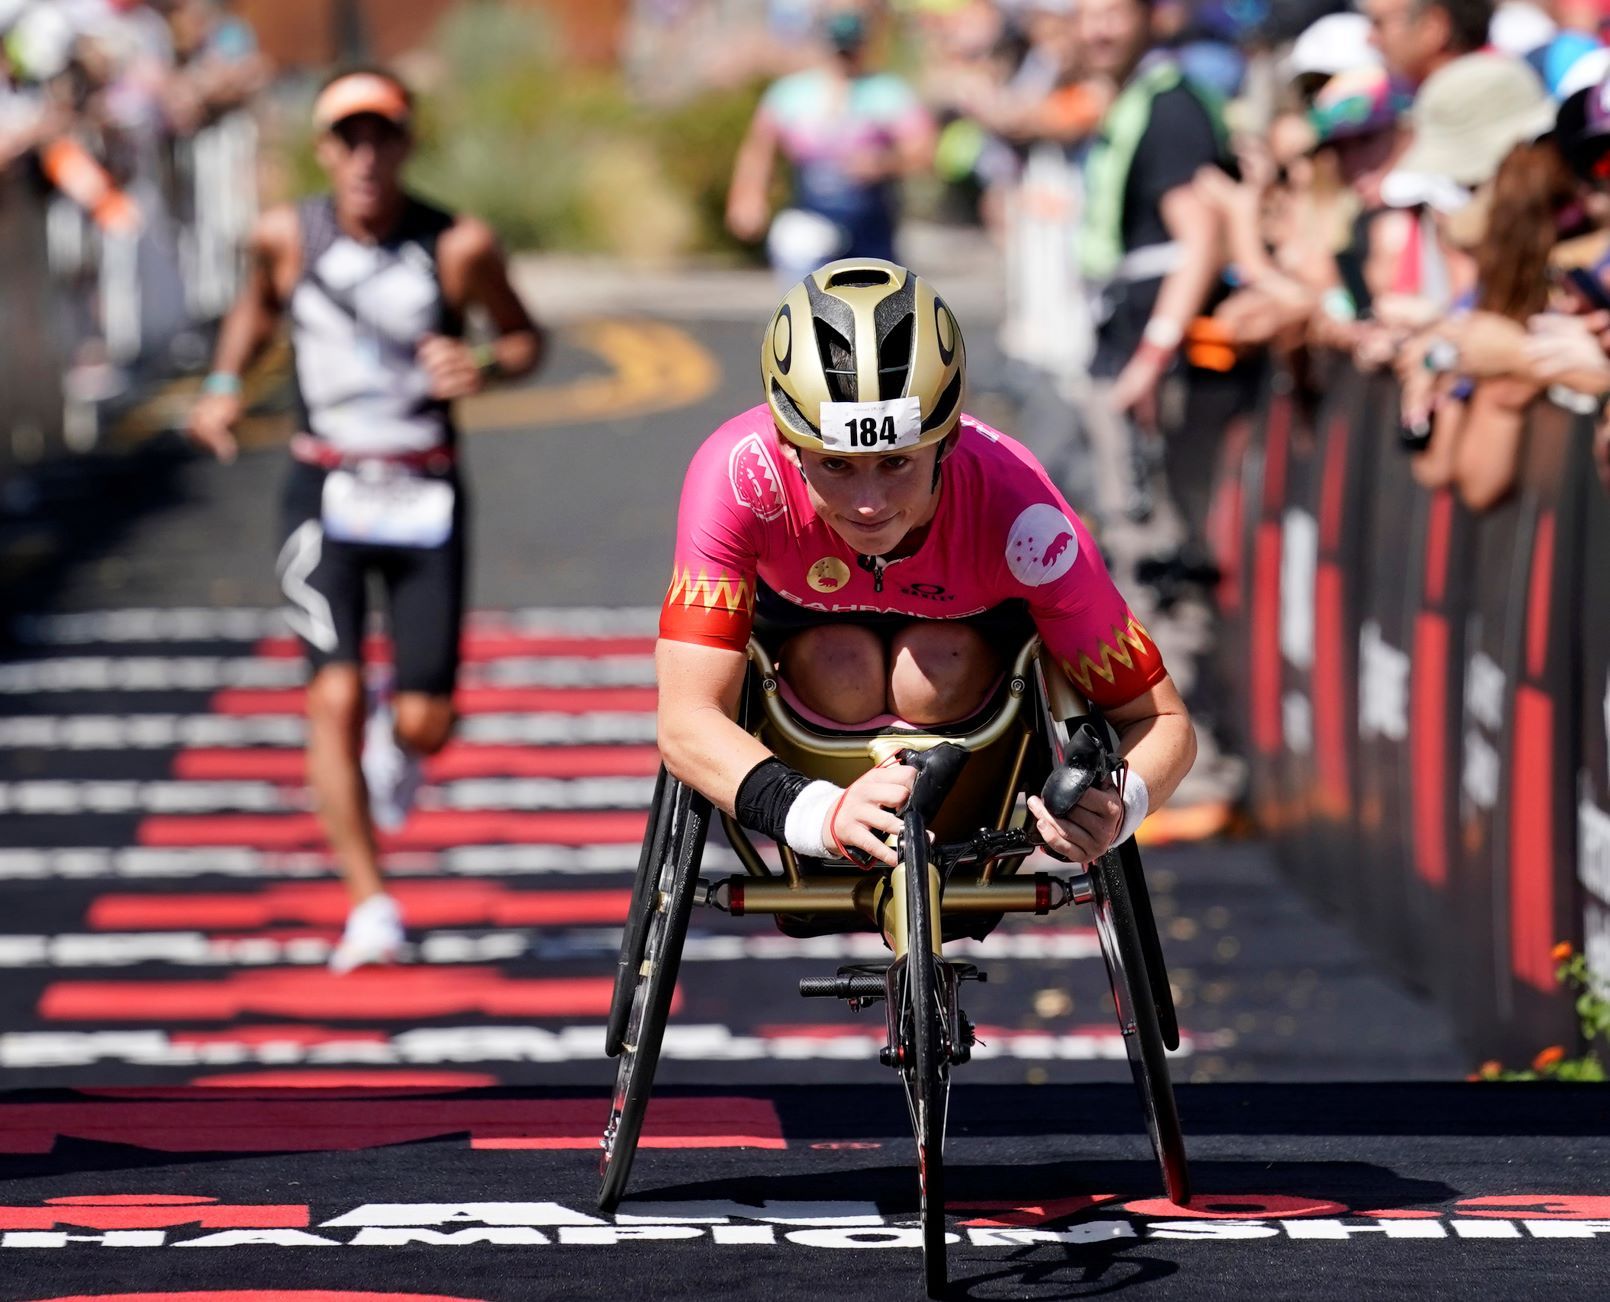 Lauren Parker To Continue Ironman Journey At World Championship in St